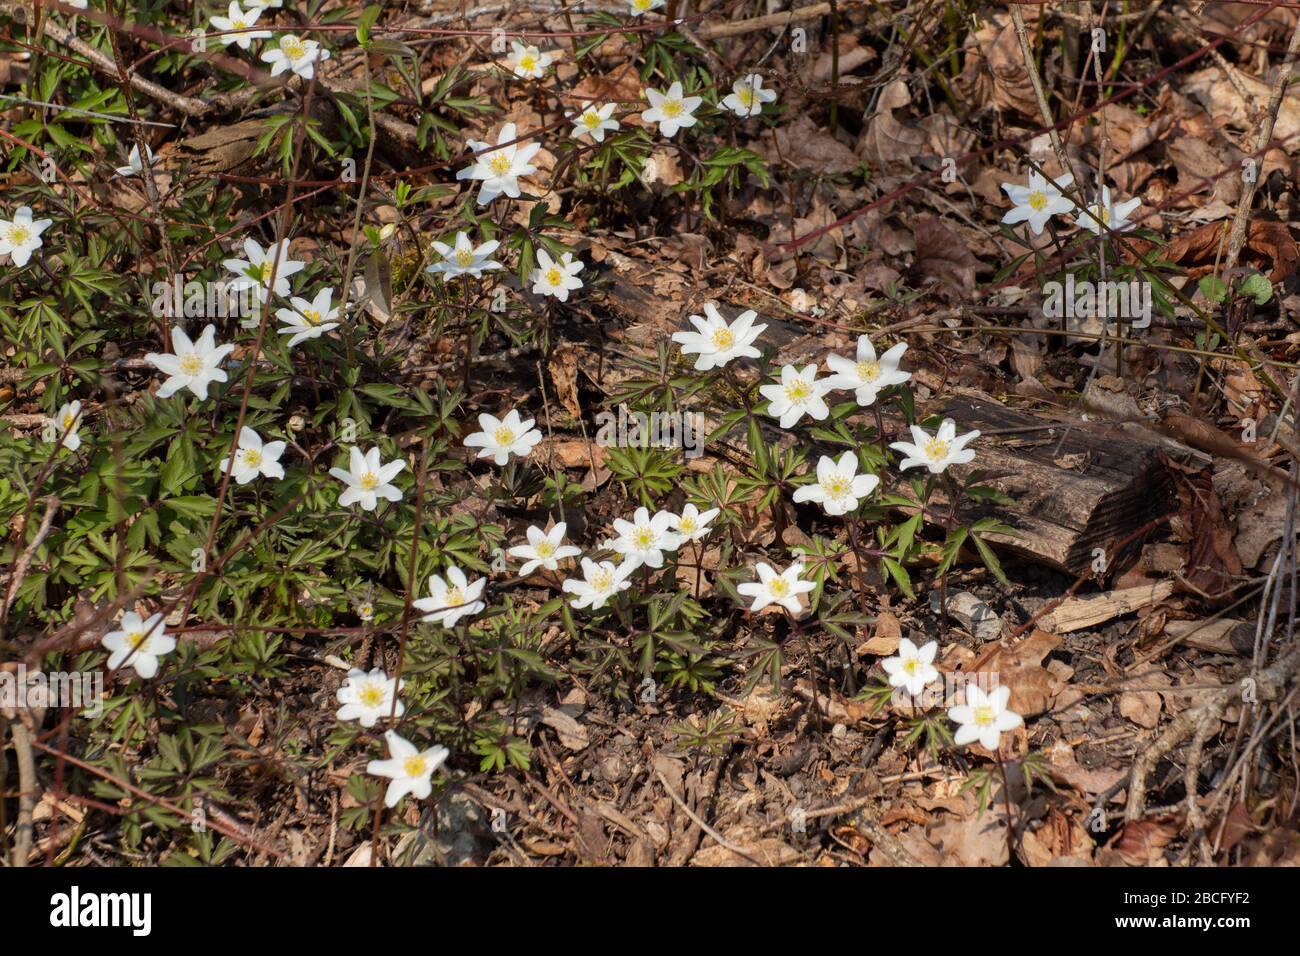 Several wood anemones growing between dry twigs and leaves, Anemone nemorosa Stock Photo